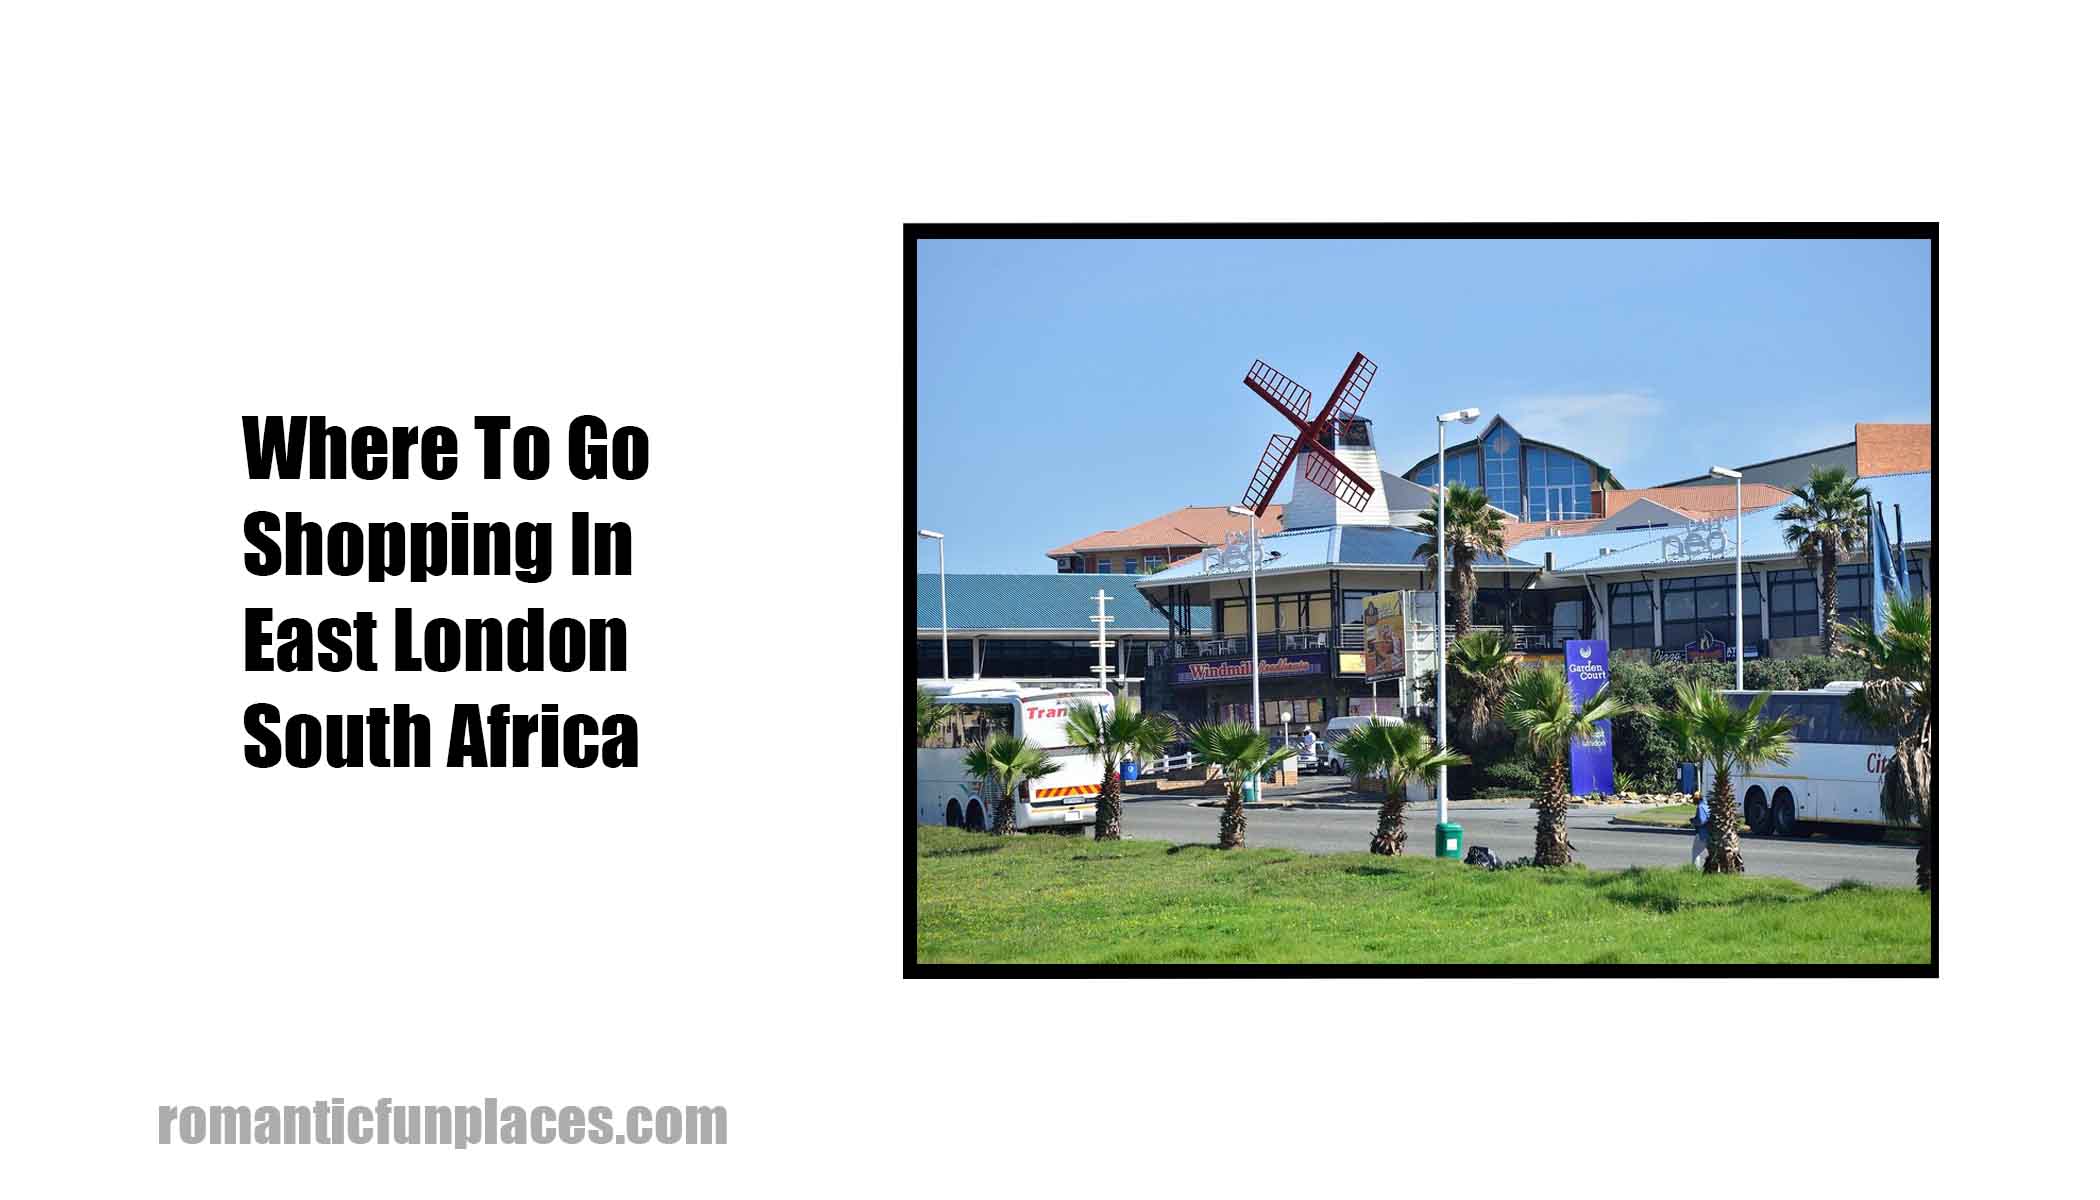 Where To Go Shopping In East London South Africa